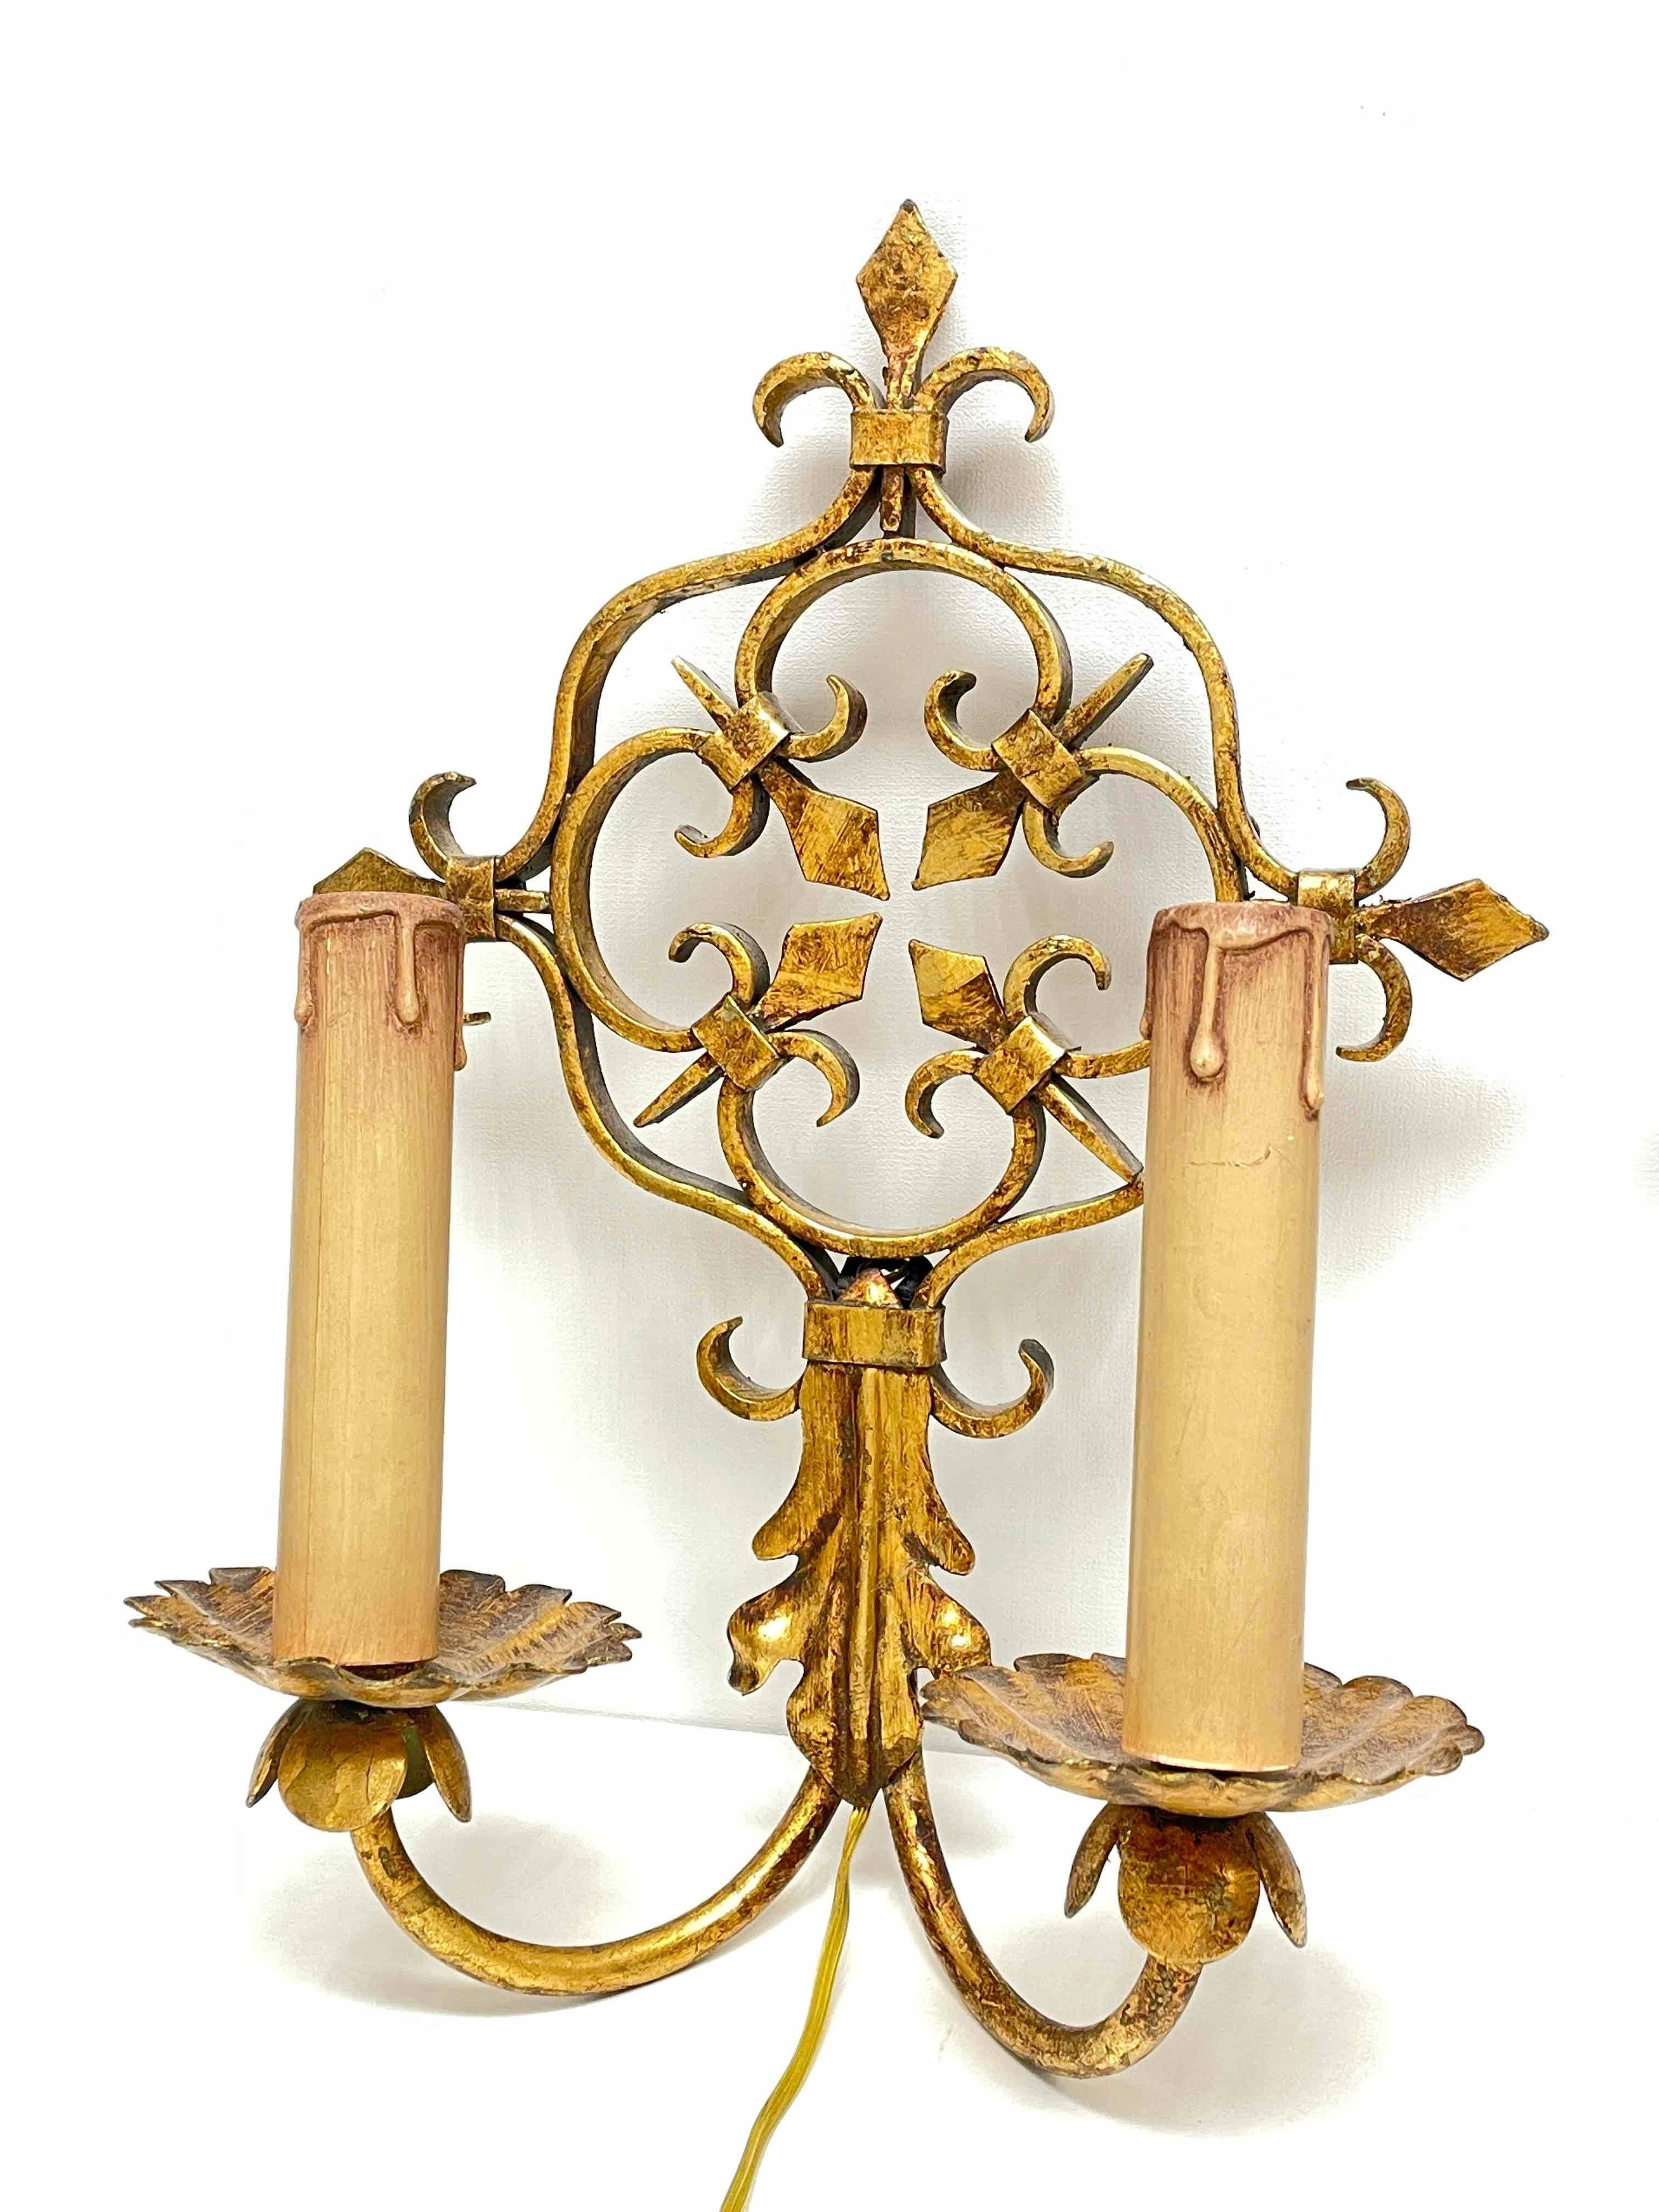 Pair of Gilt Metal Tole Toleware Sconces by Banci Firenze, Italy, 1960s For Sale 1